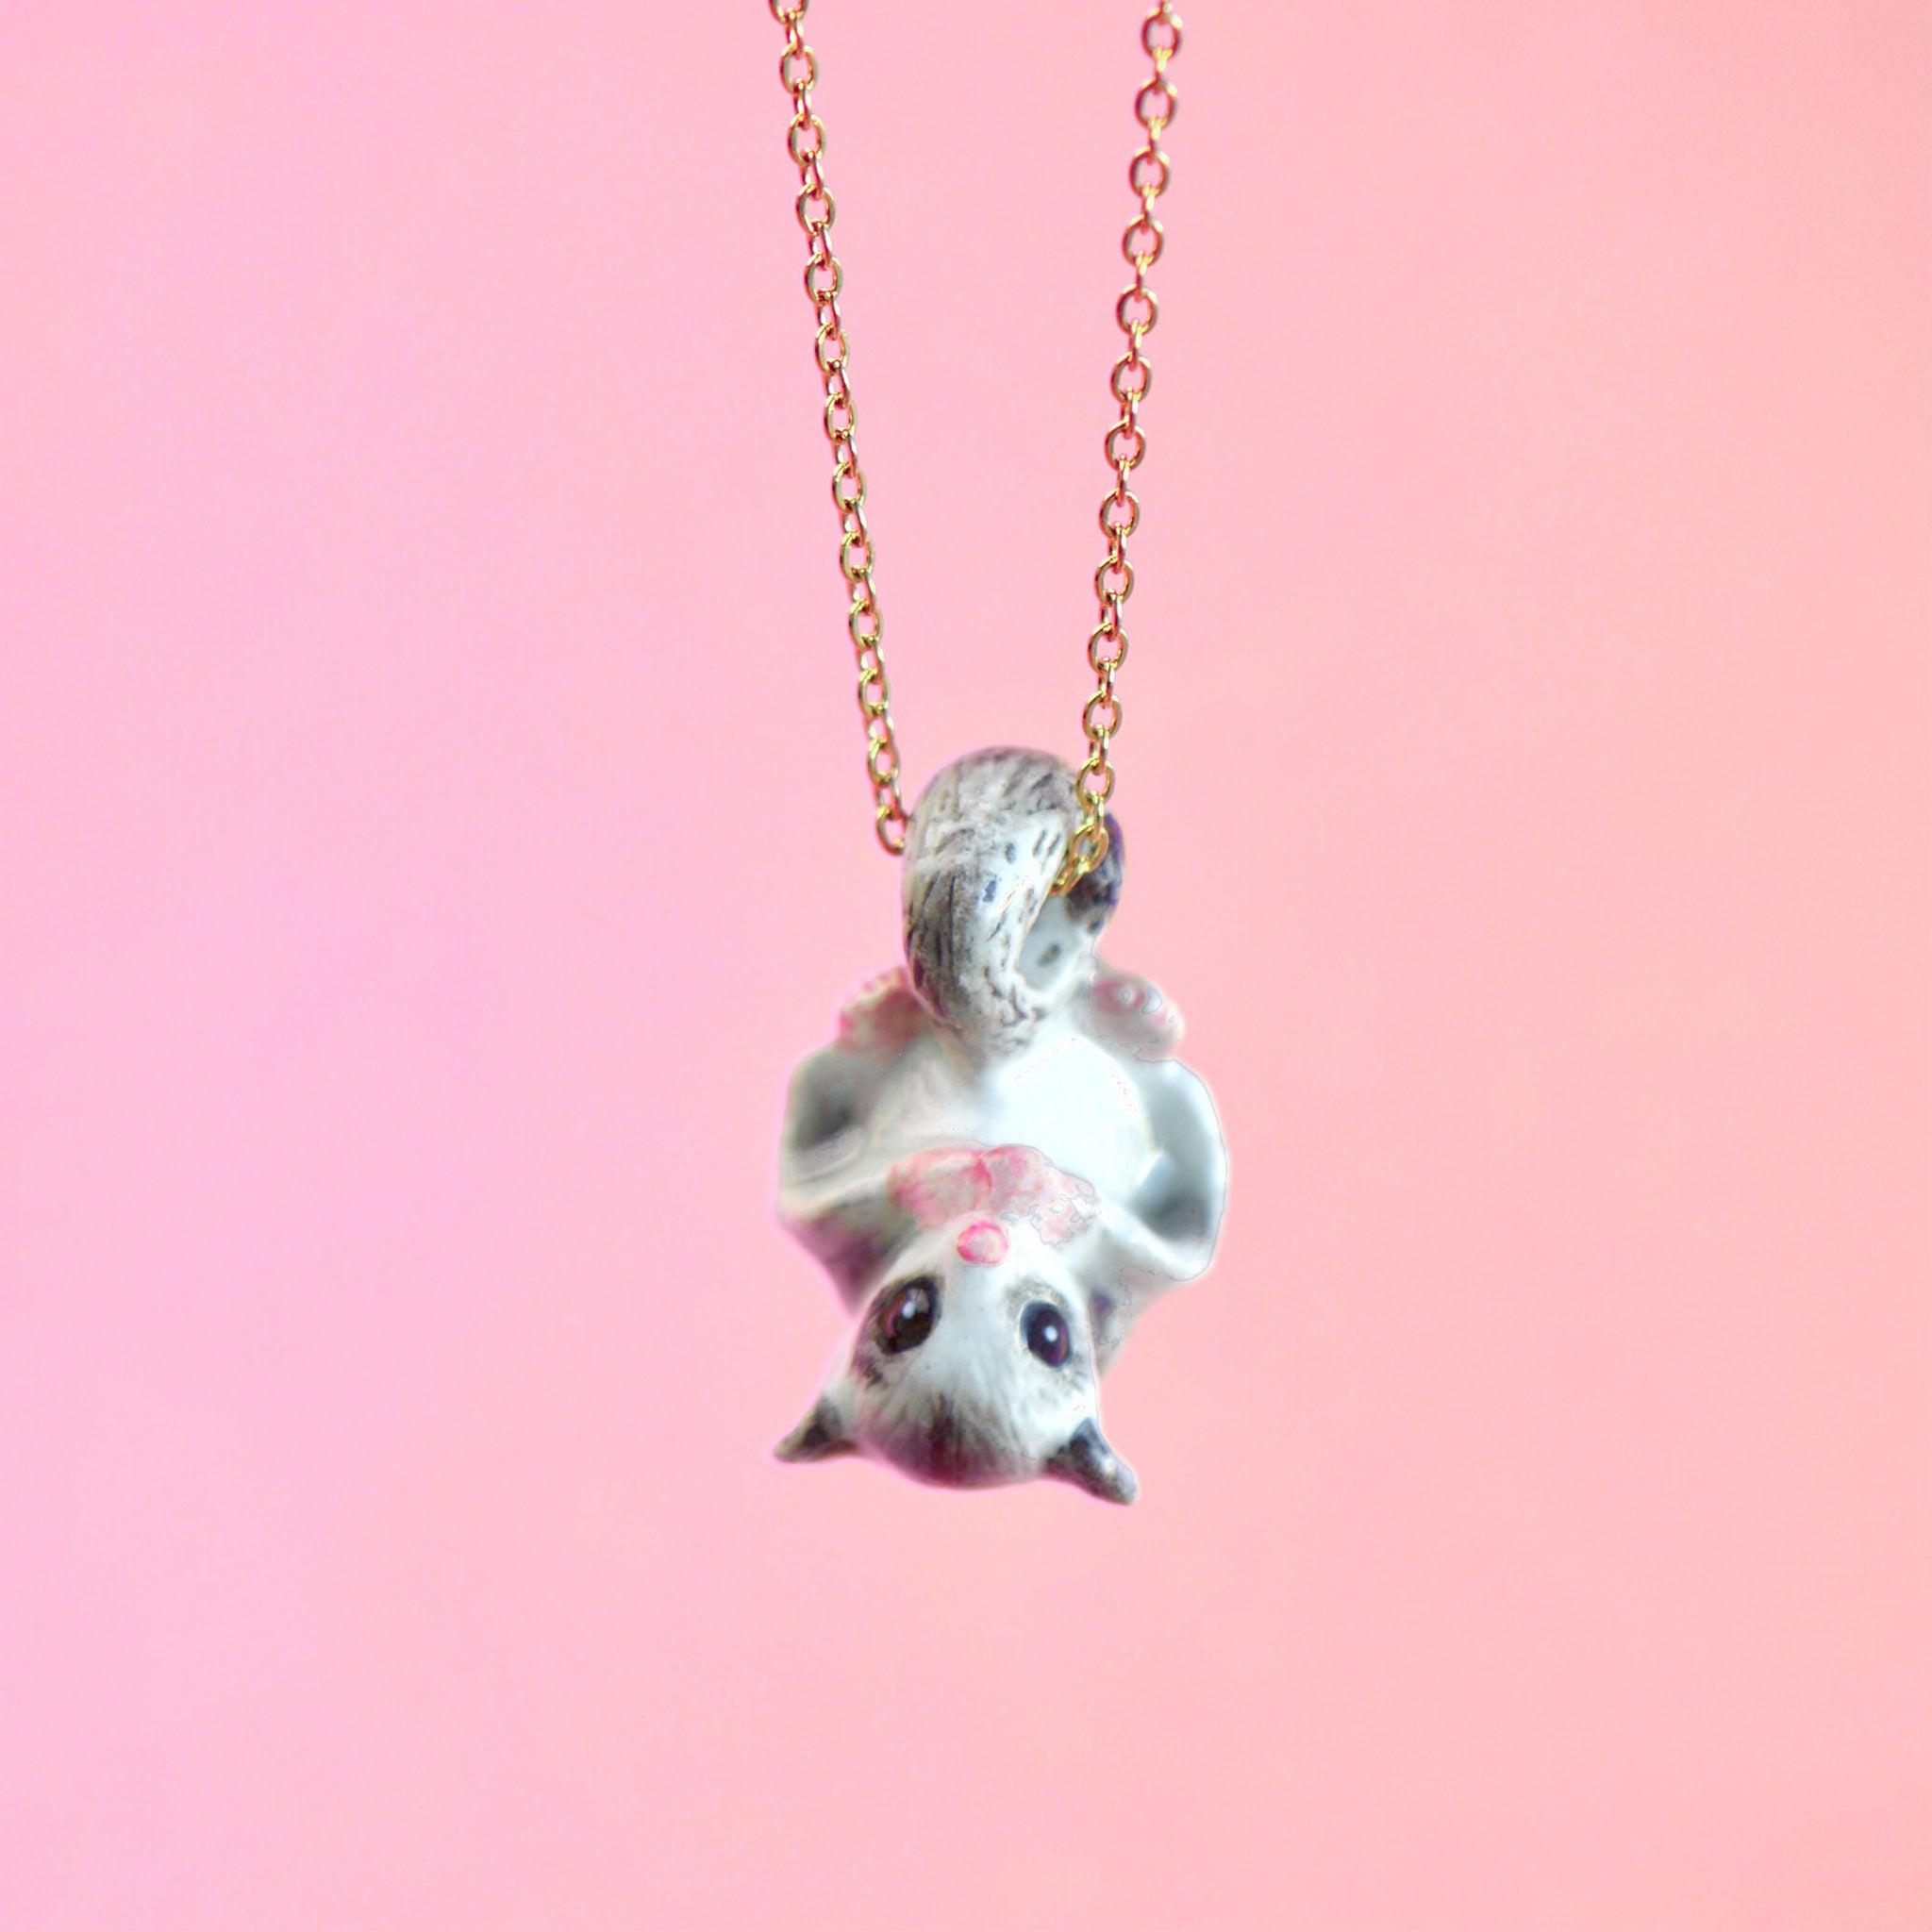 Supper Cute Dog Neck Chain Gold Color/ Jewelry for Pet -  Norway